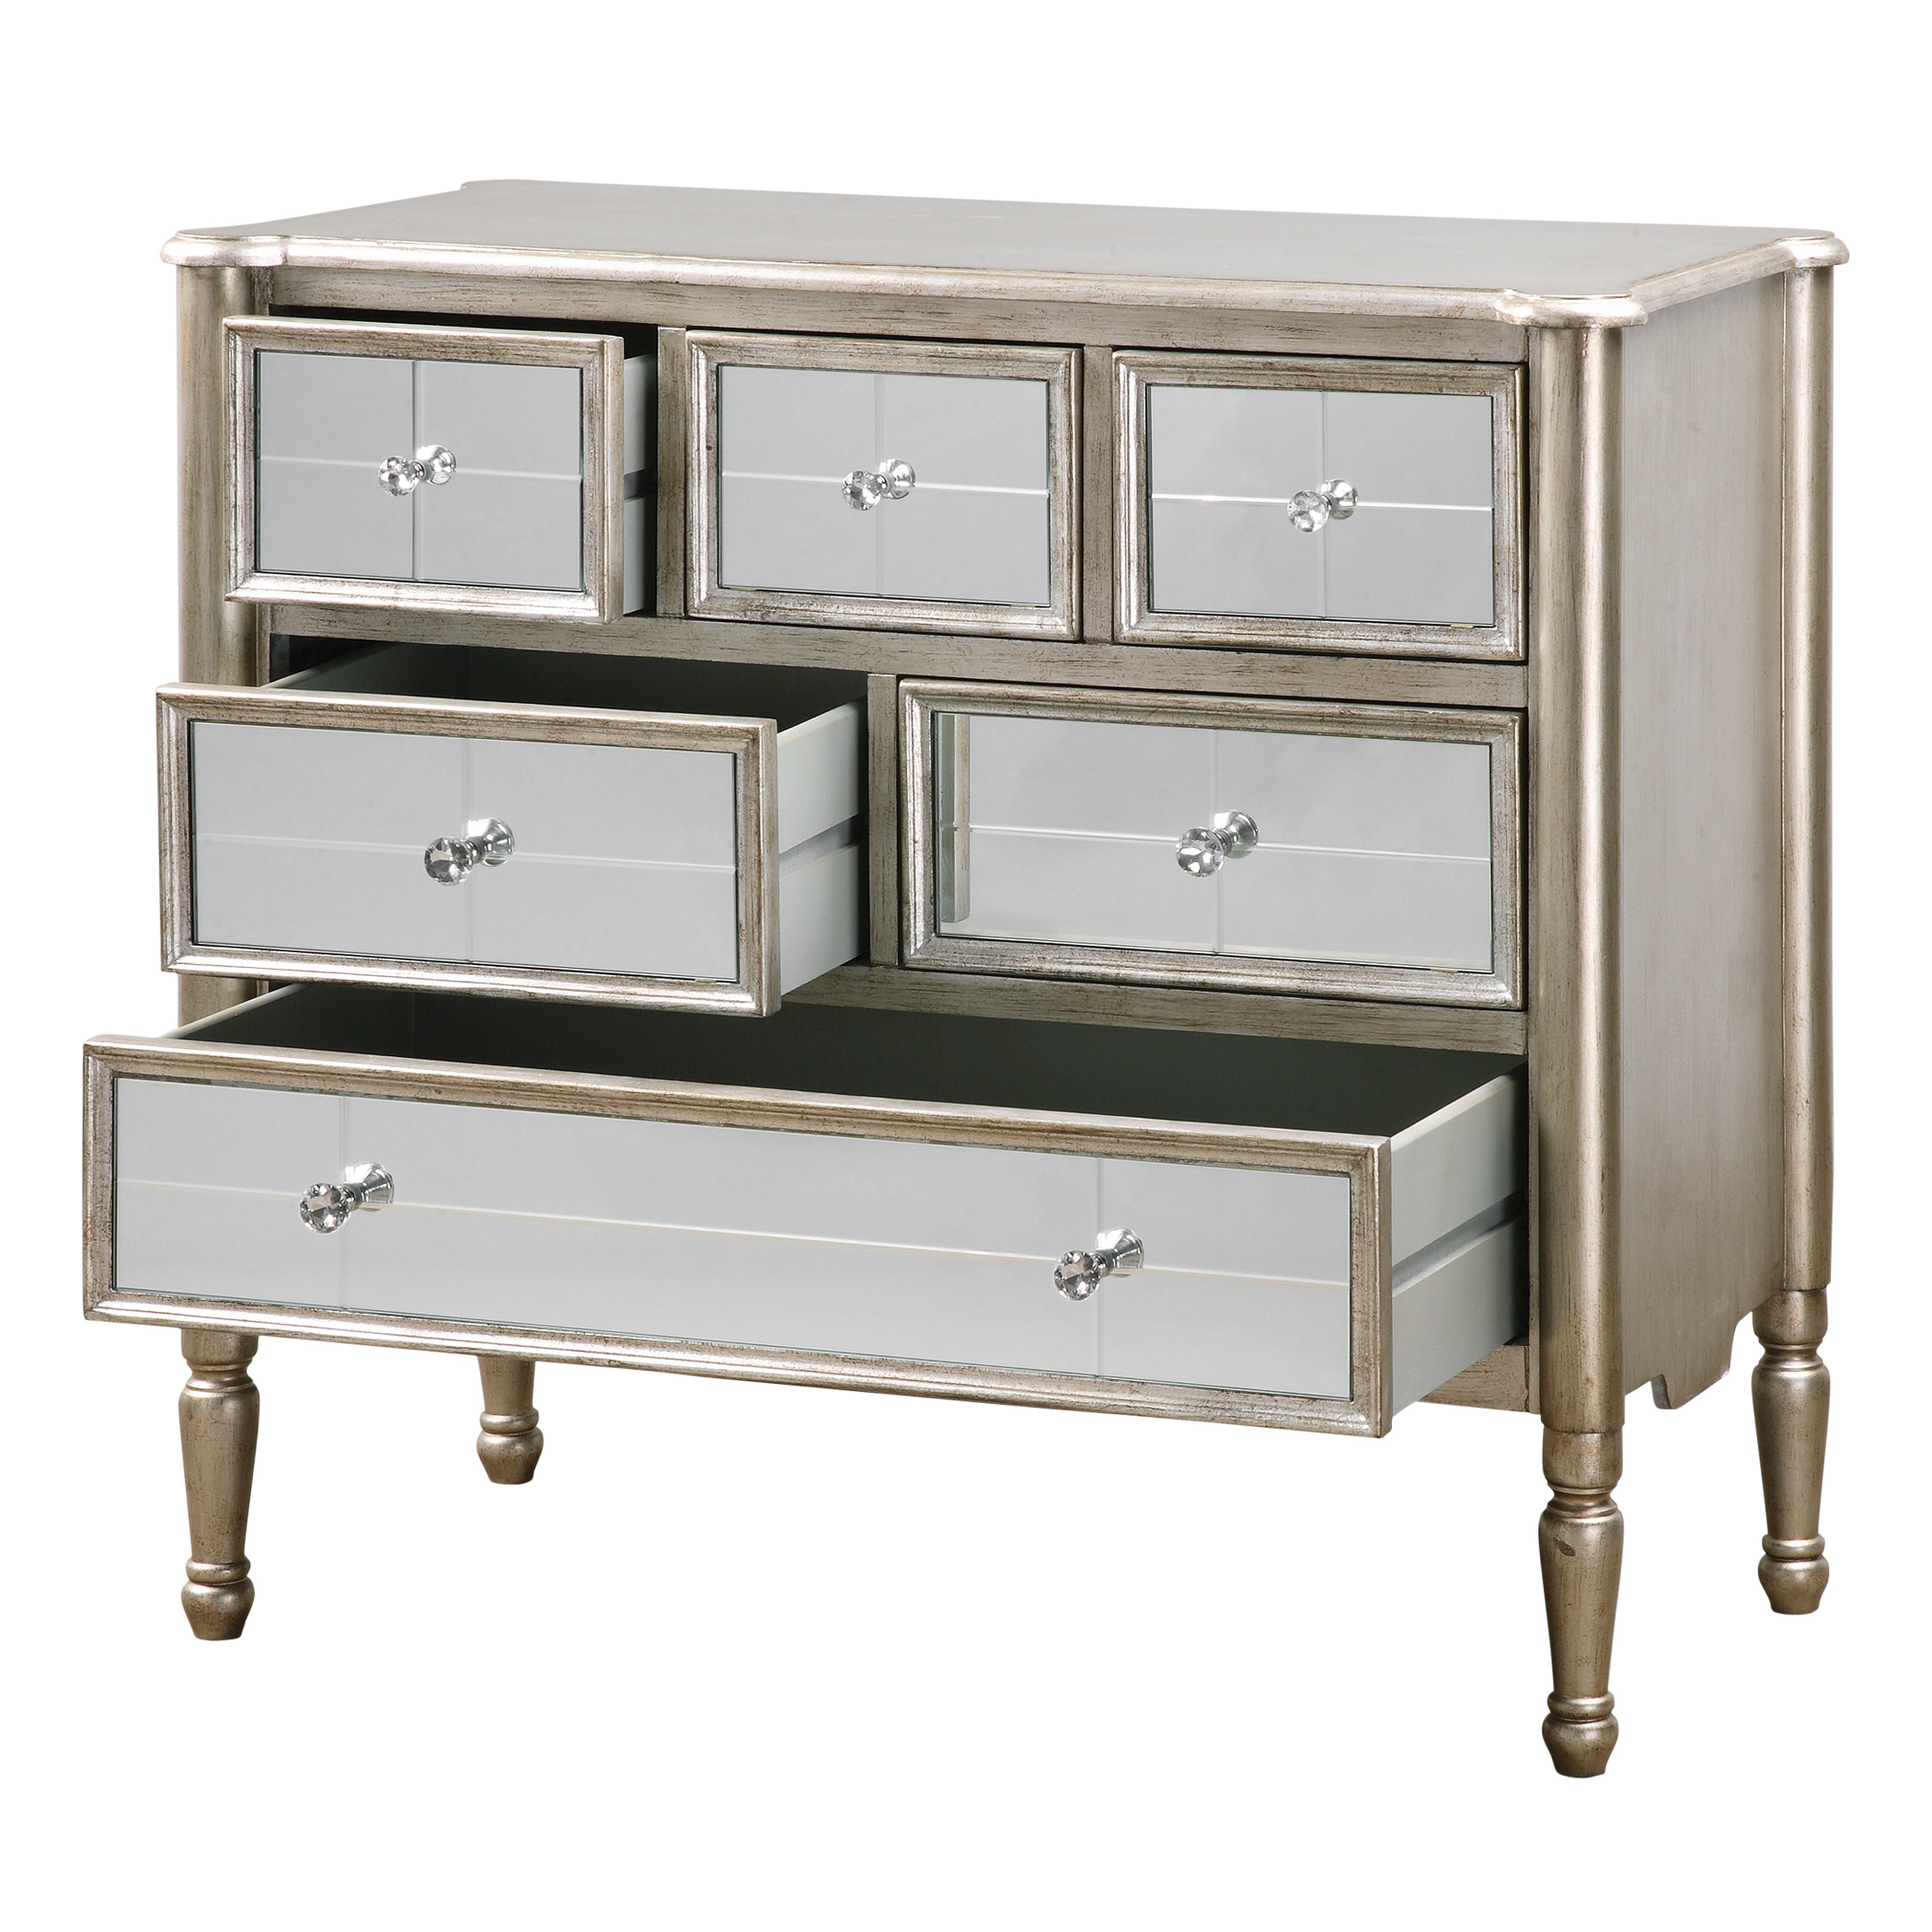 Rayvon Mirrored Accent Chest - Image 2